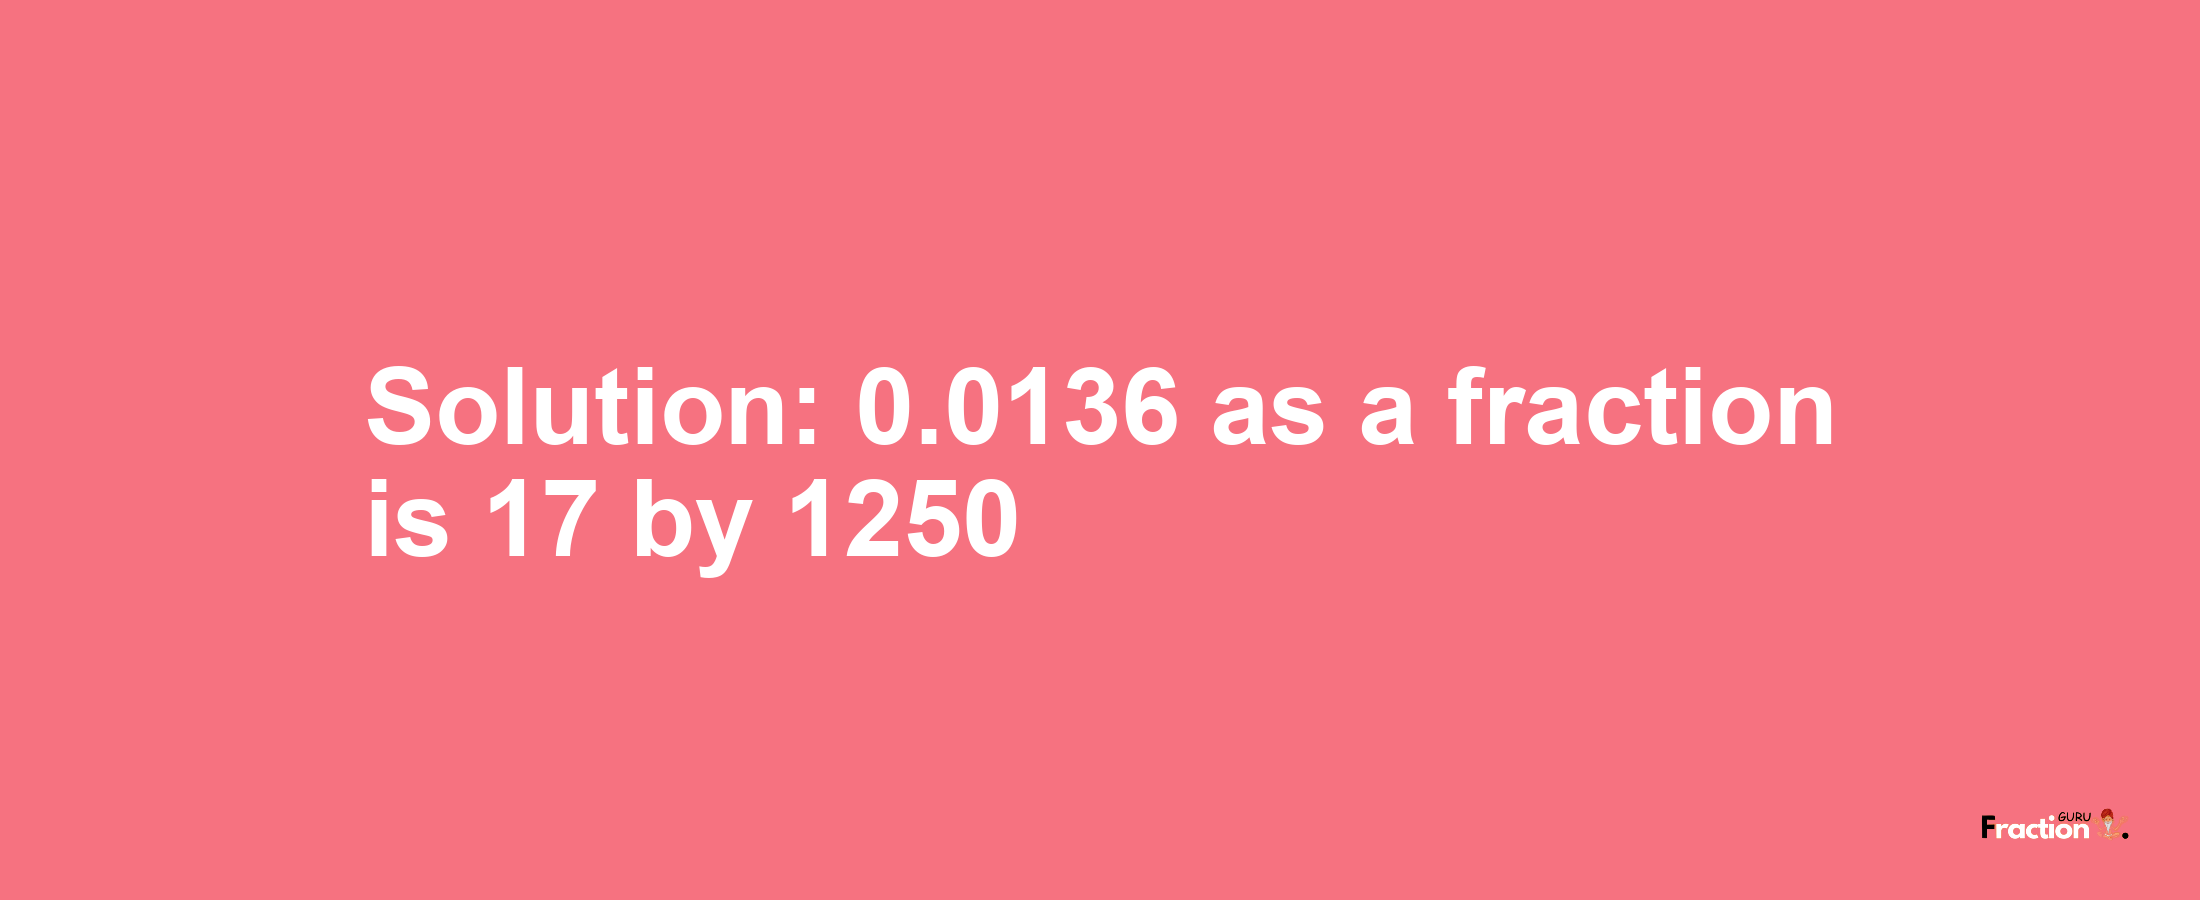 Solution:0.0136 as a fraction is 17/1250